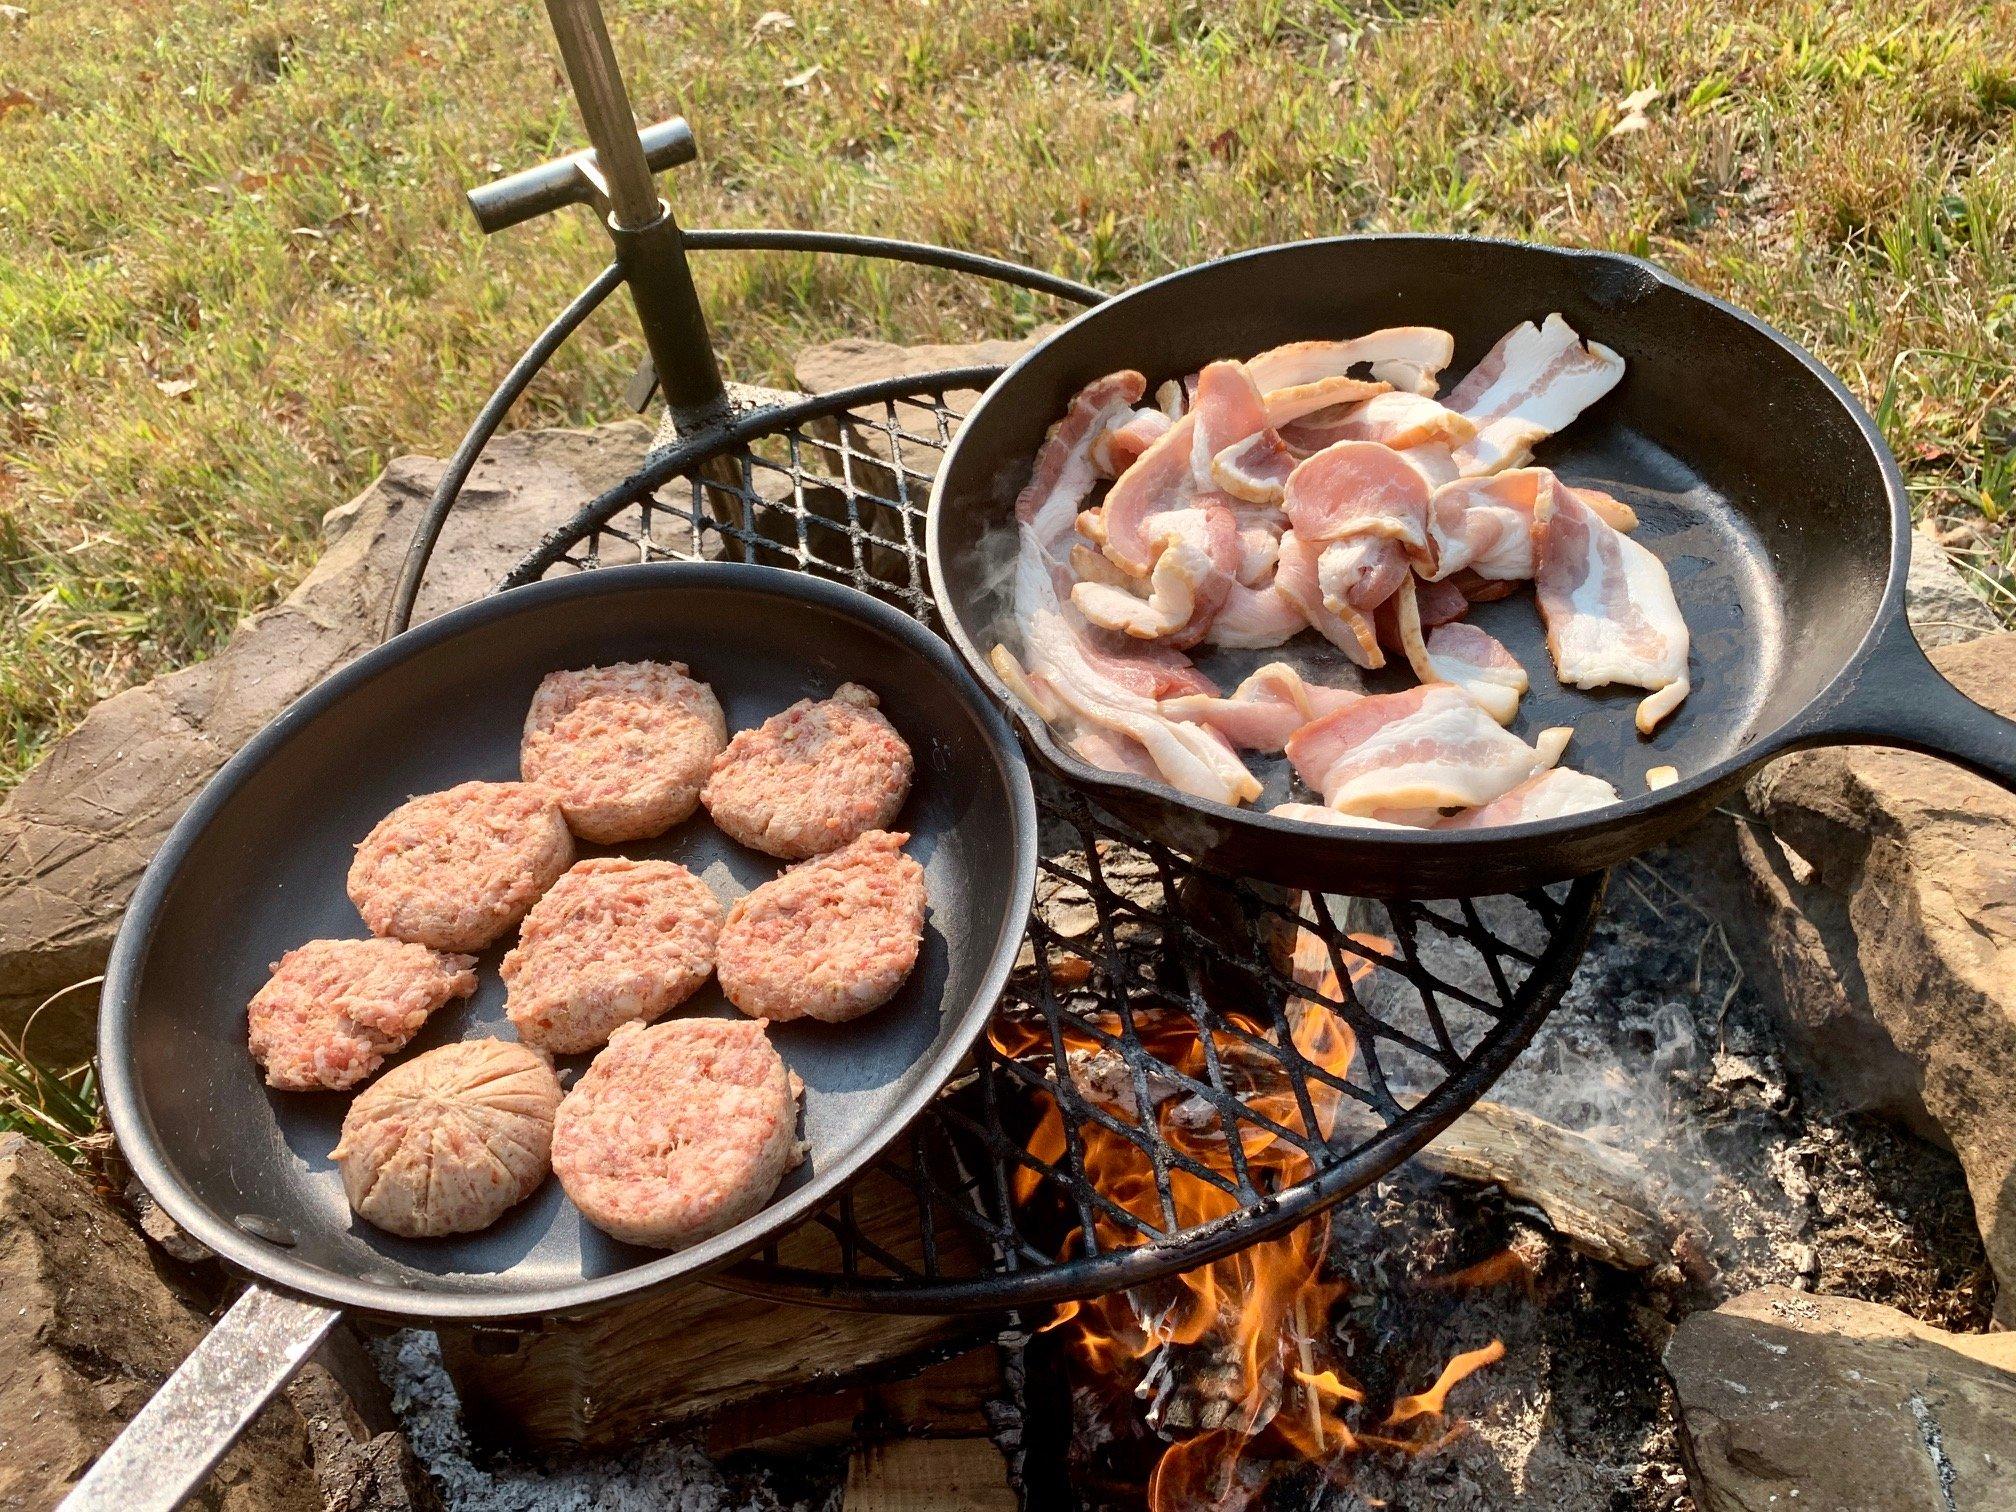 Cook a big late-morning breakfast once everyone returns from the morning hunt.